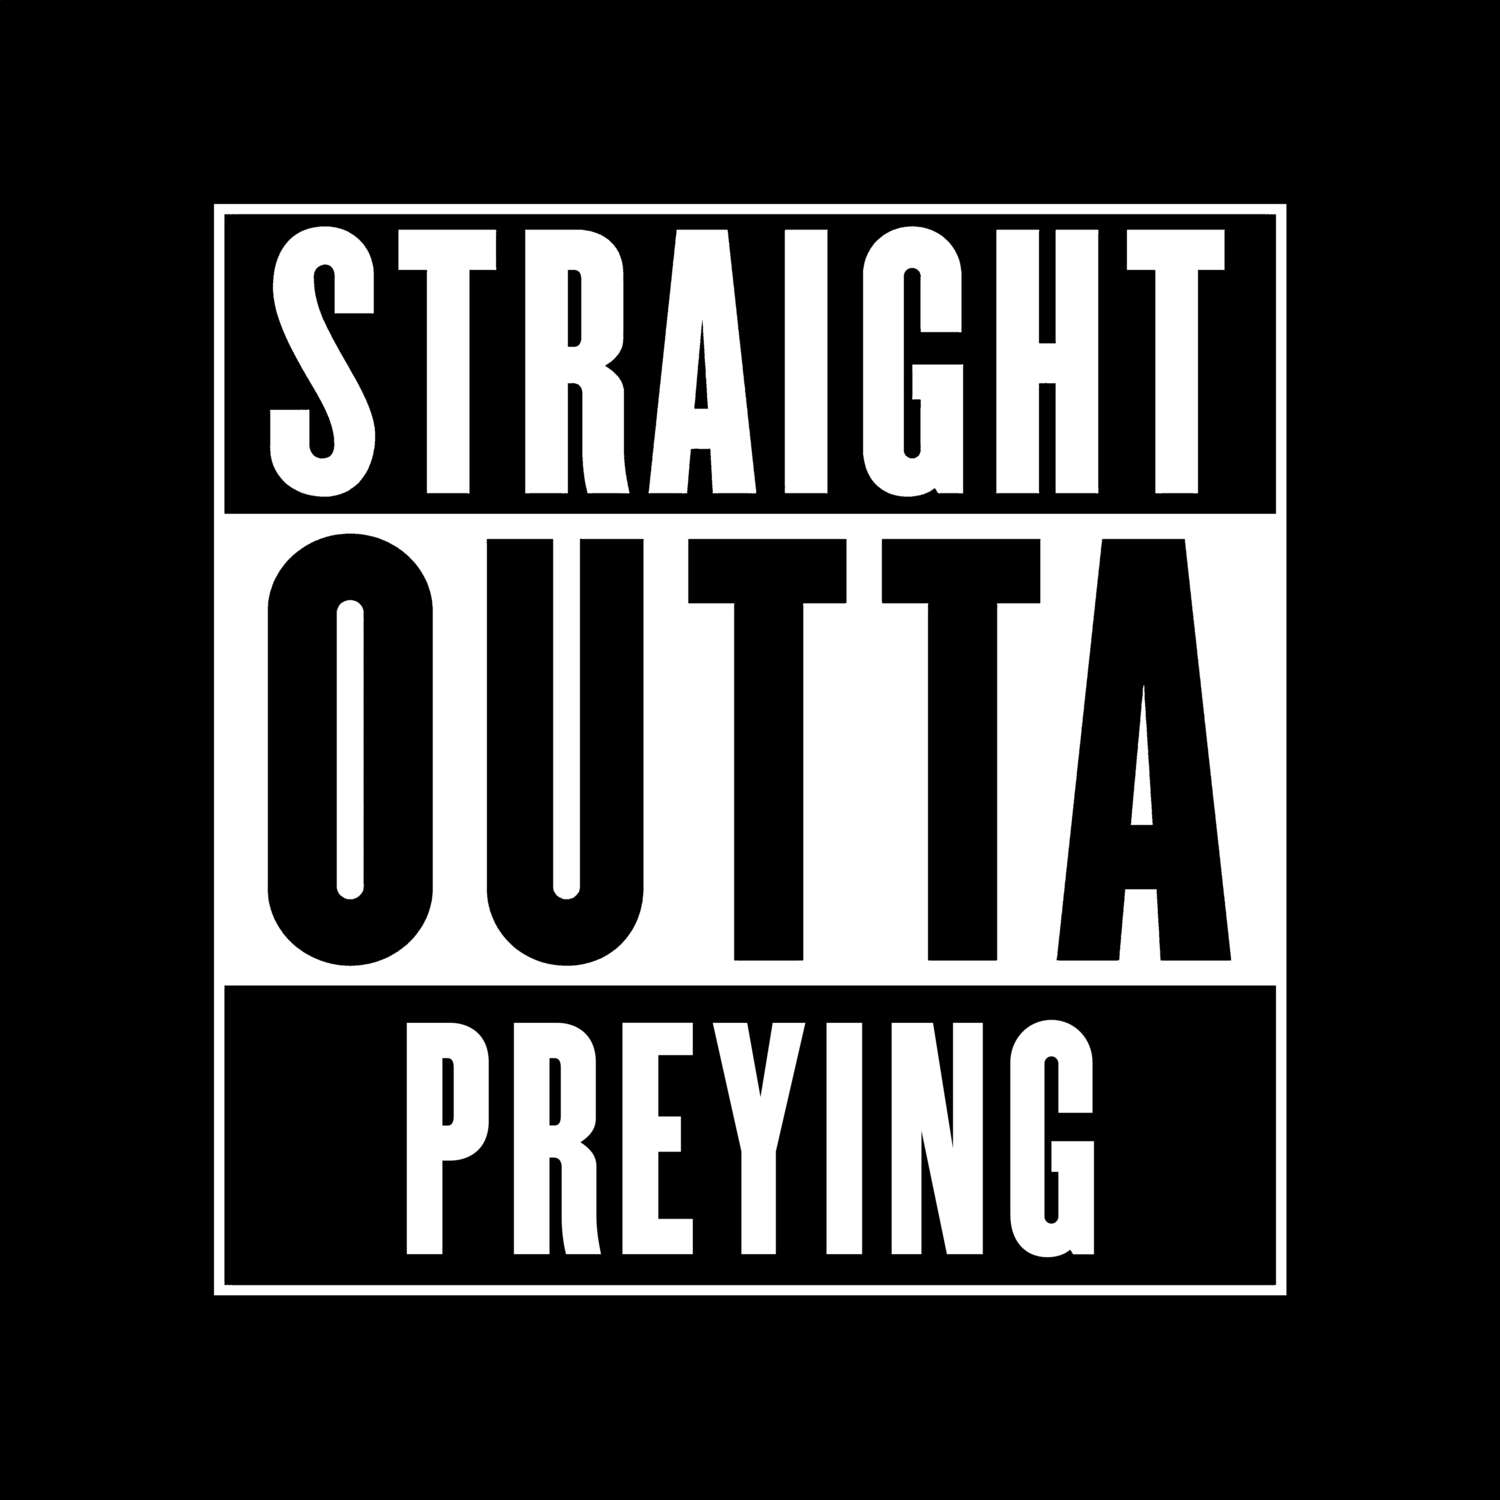 Preying T-Shirt »Straight Outta«